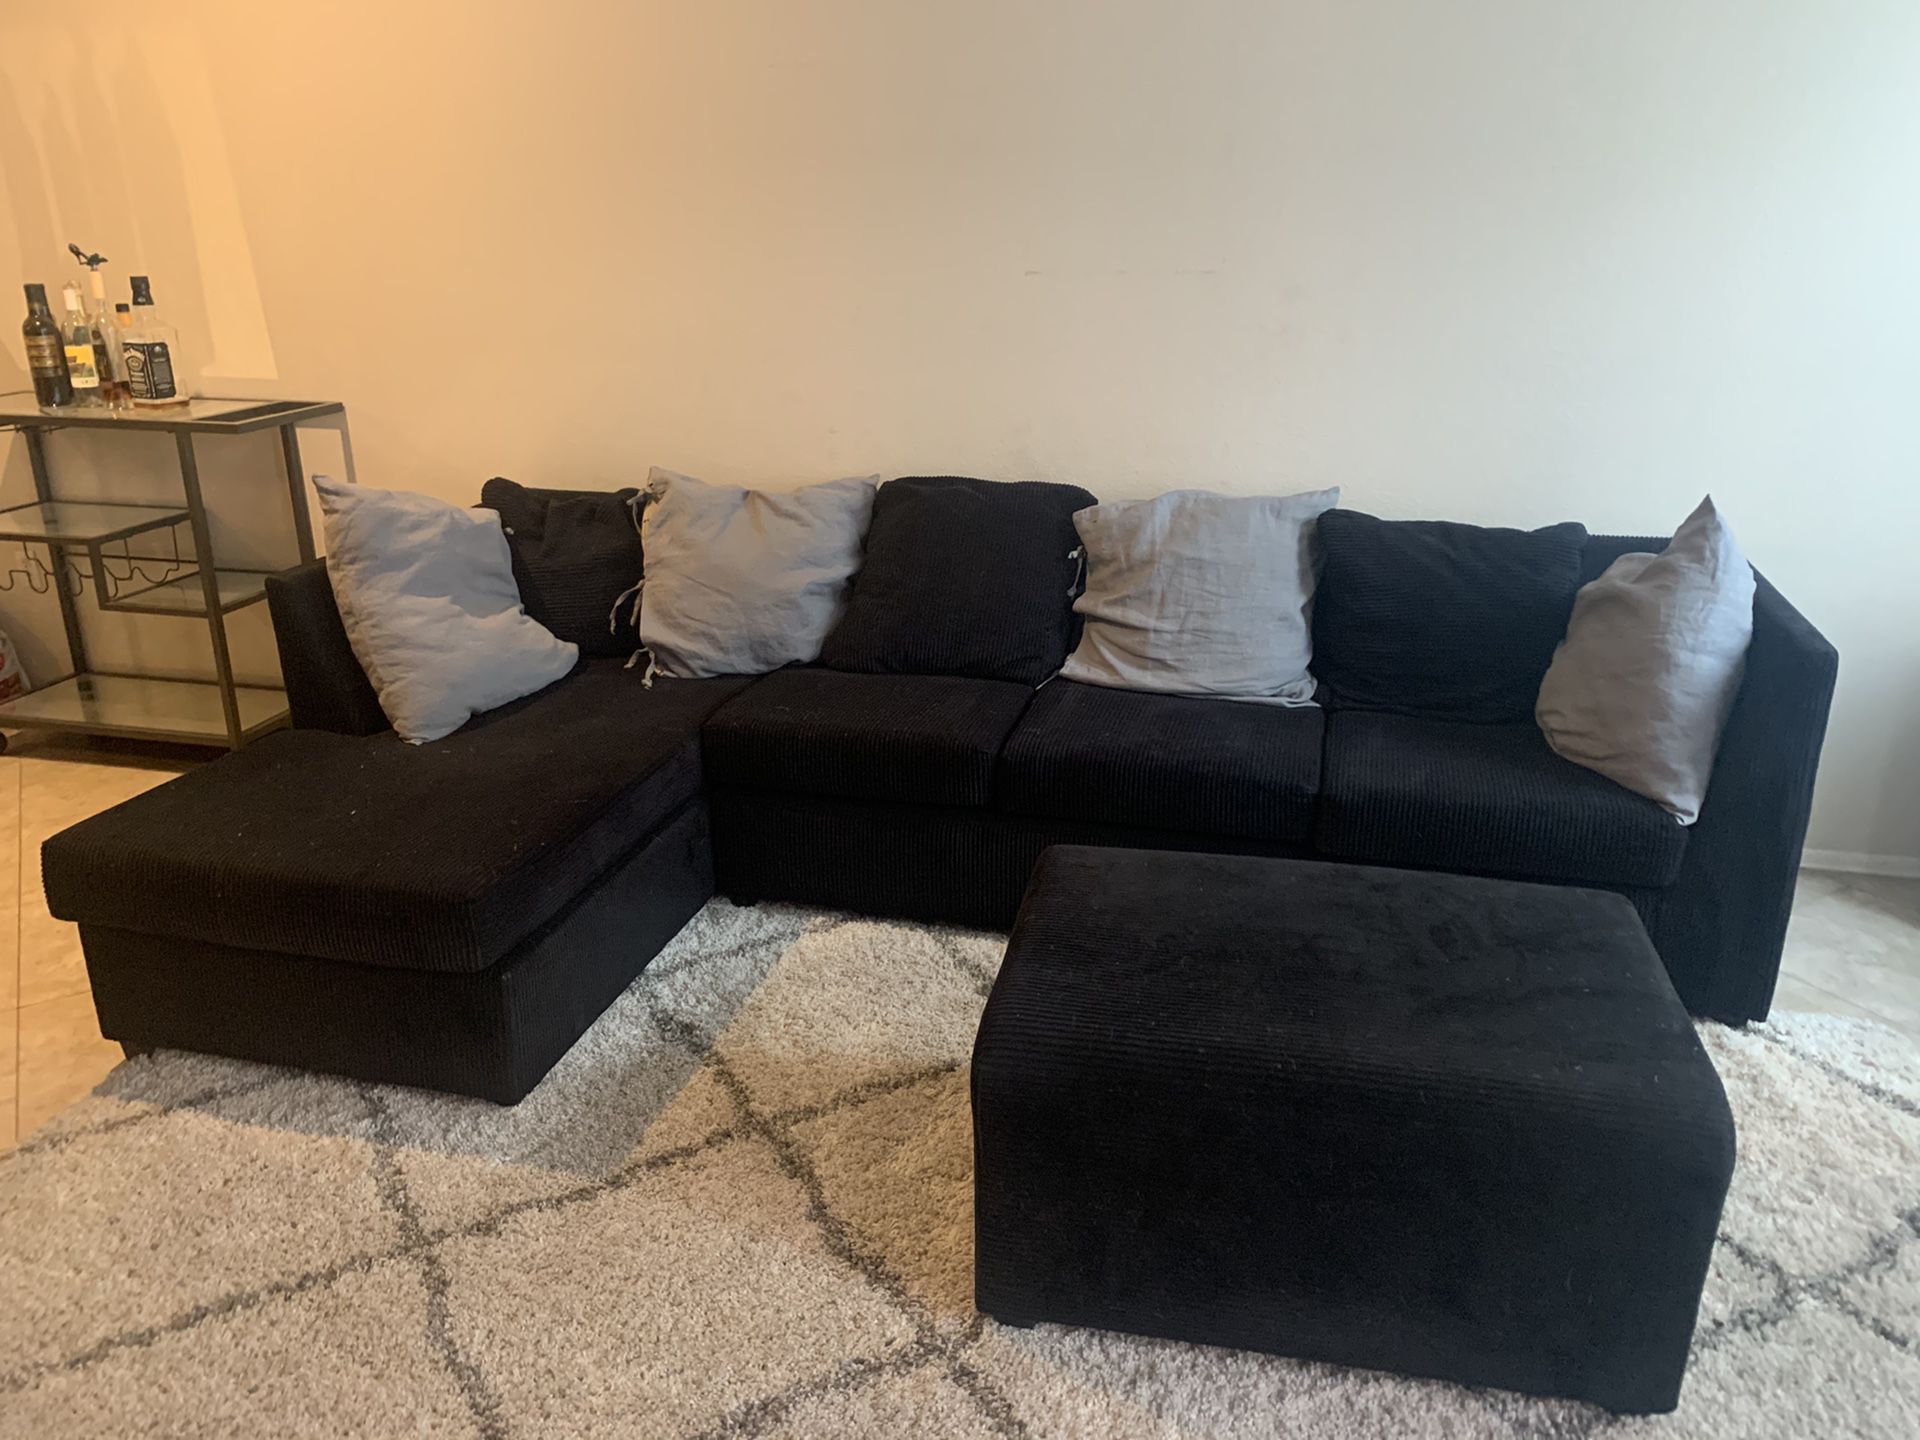 Couch & Ottoman